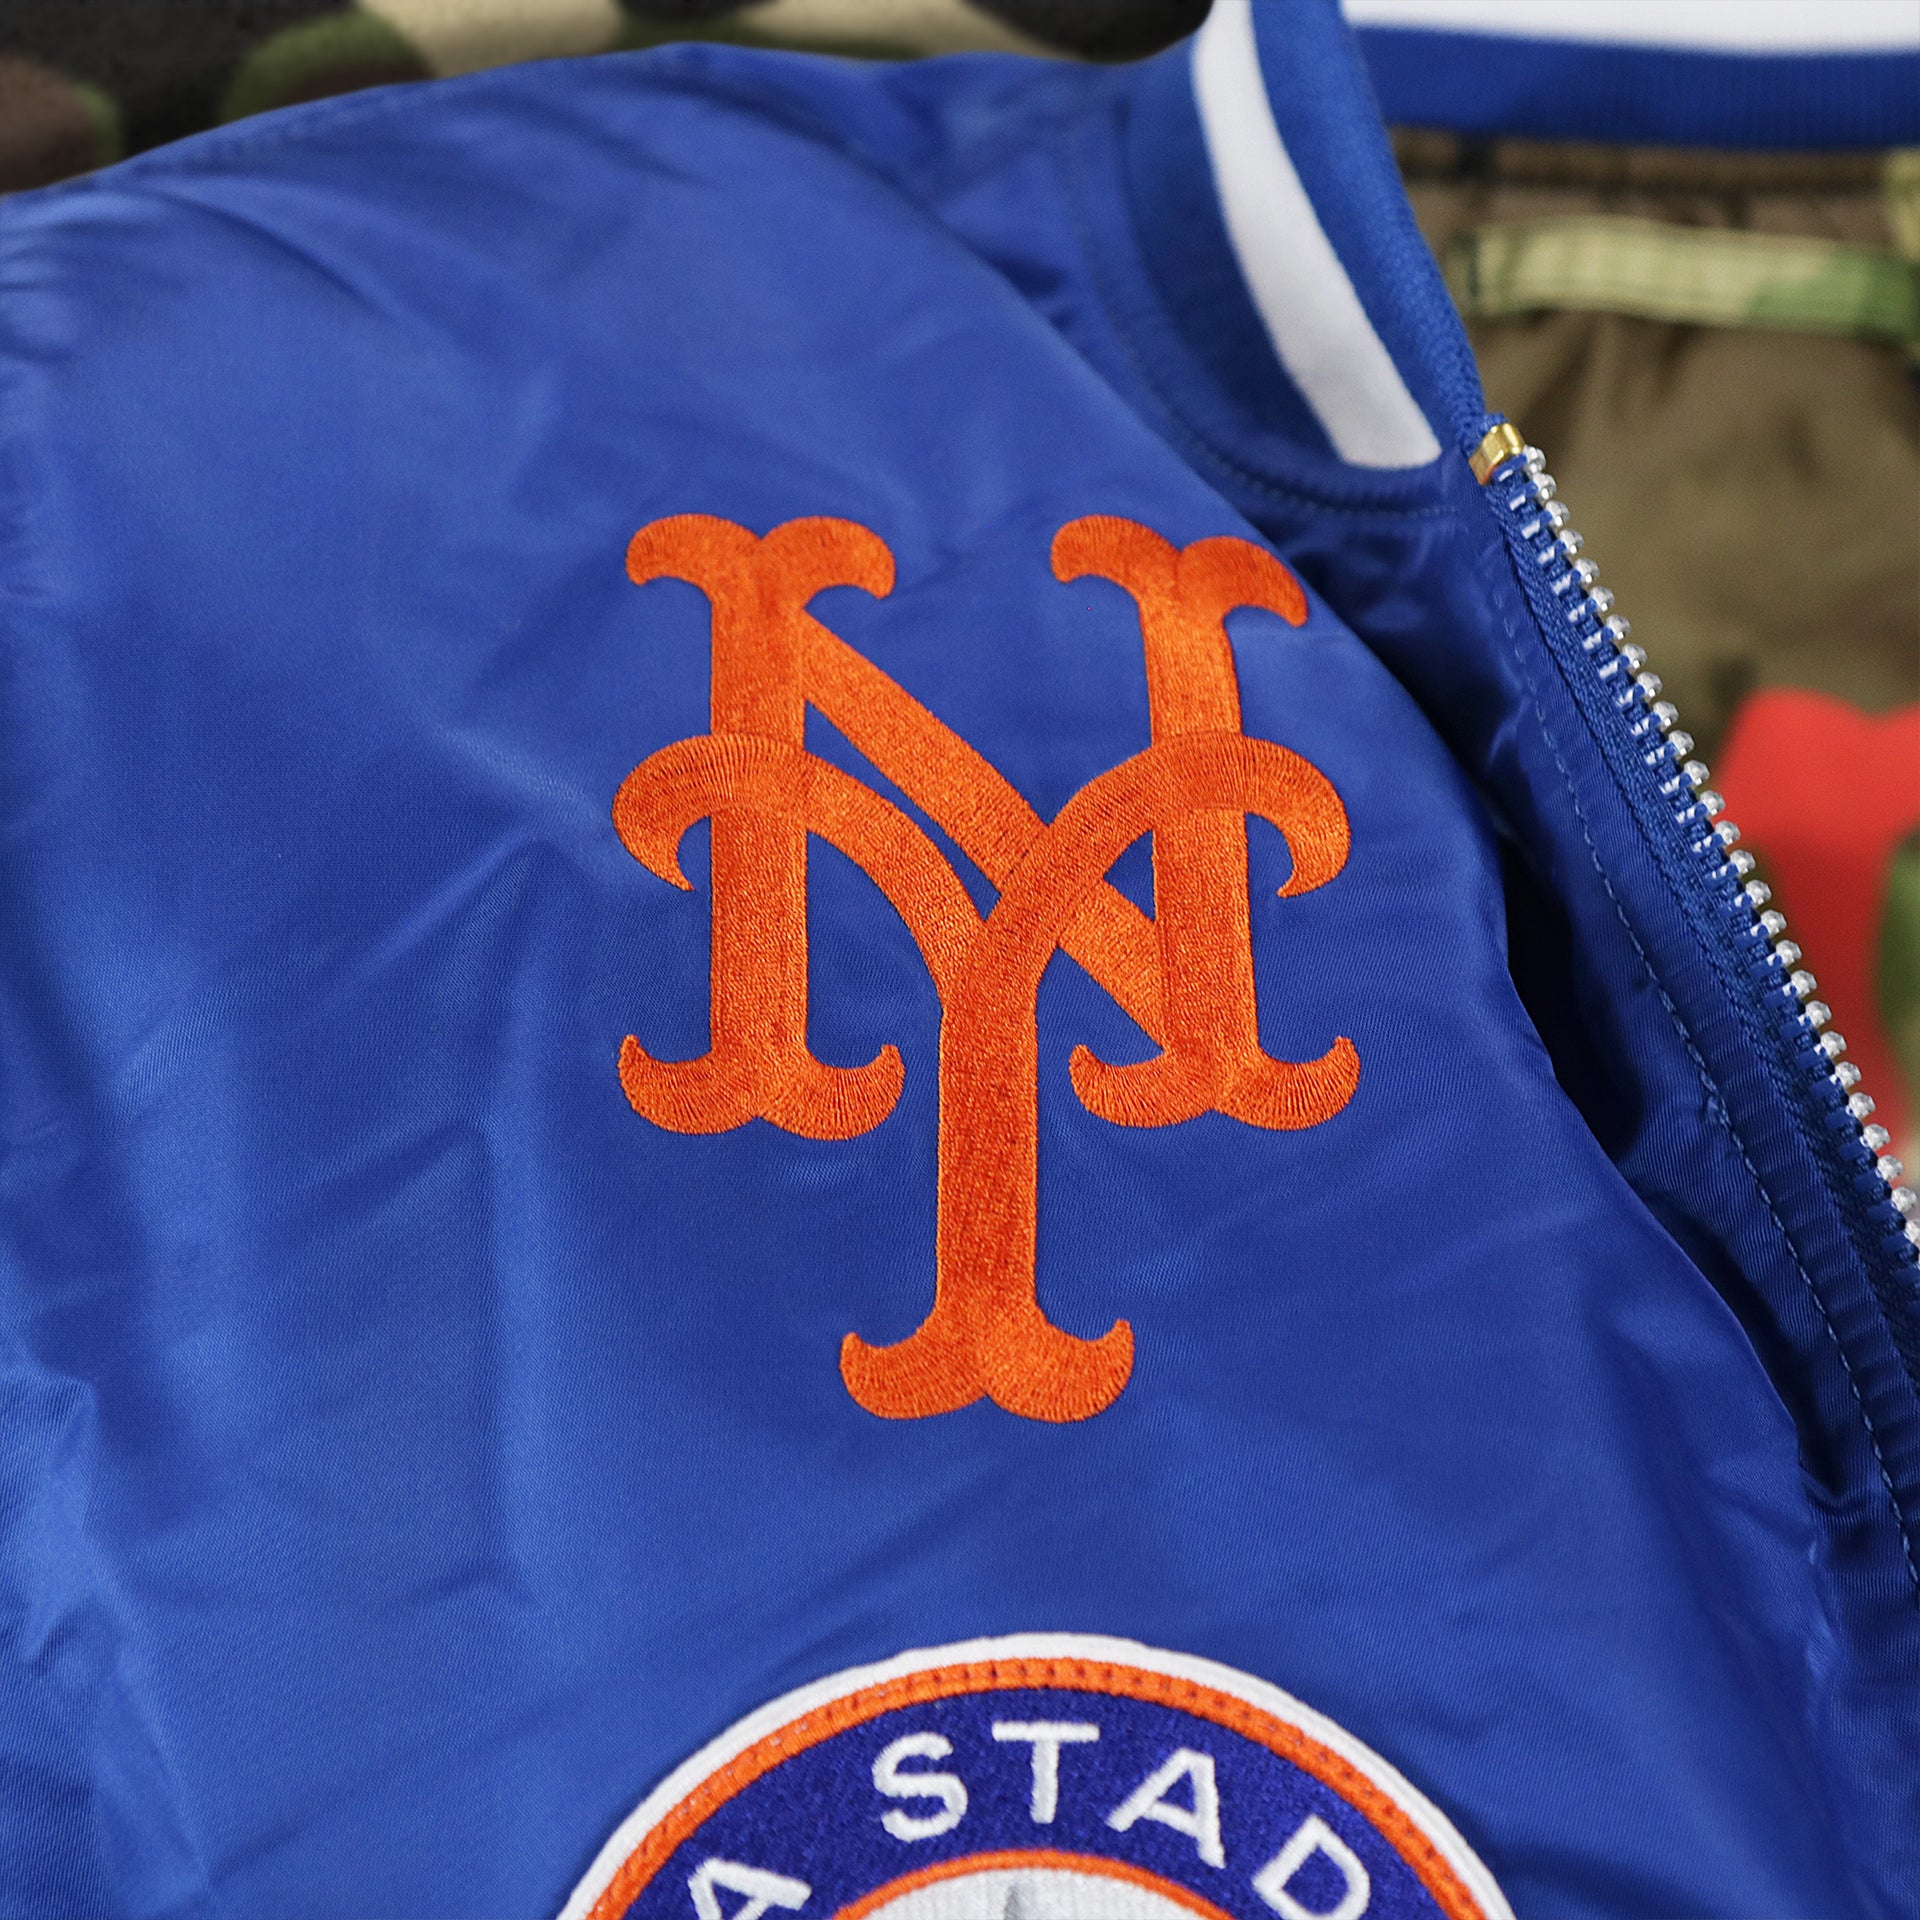 The New York Mets Logo Embroidered on the New York Mets MLB Patch Alpha Industries Reversible Bomber Jacket With Camo Liner | Royal Blue Bomber Jacket